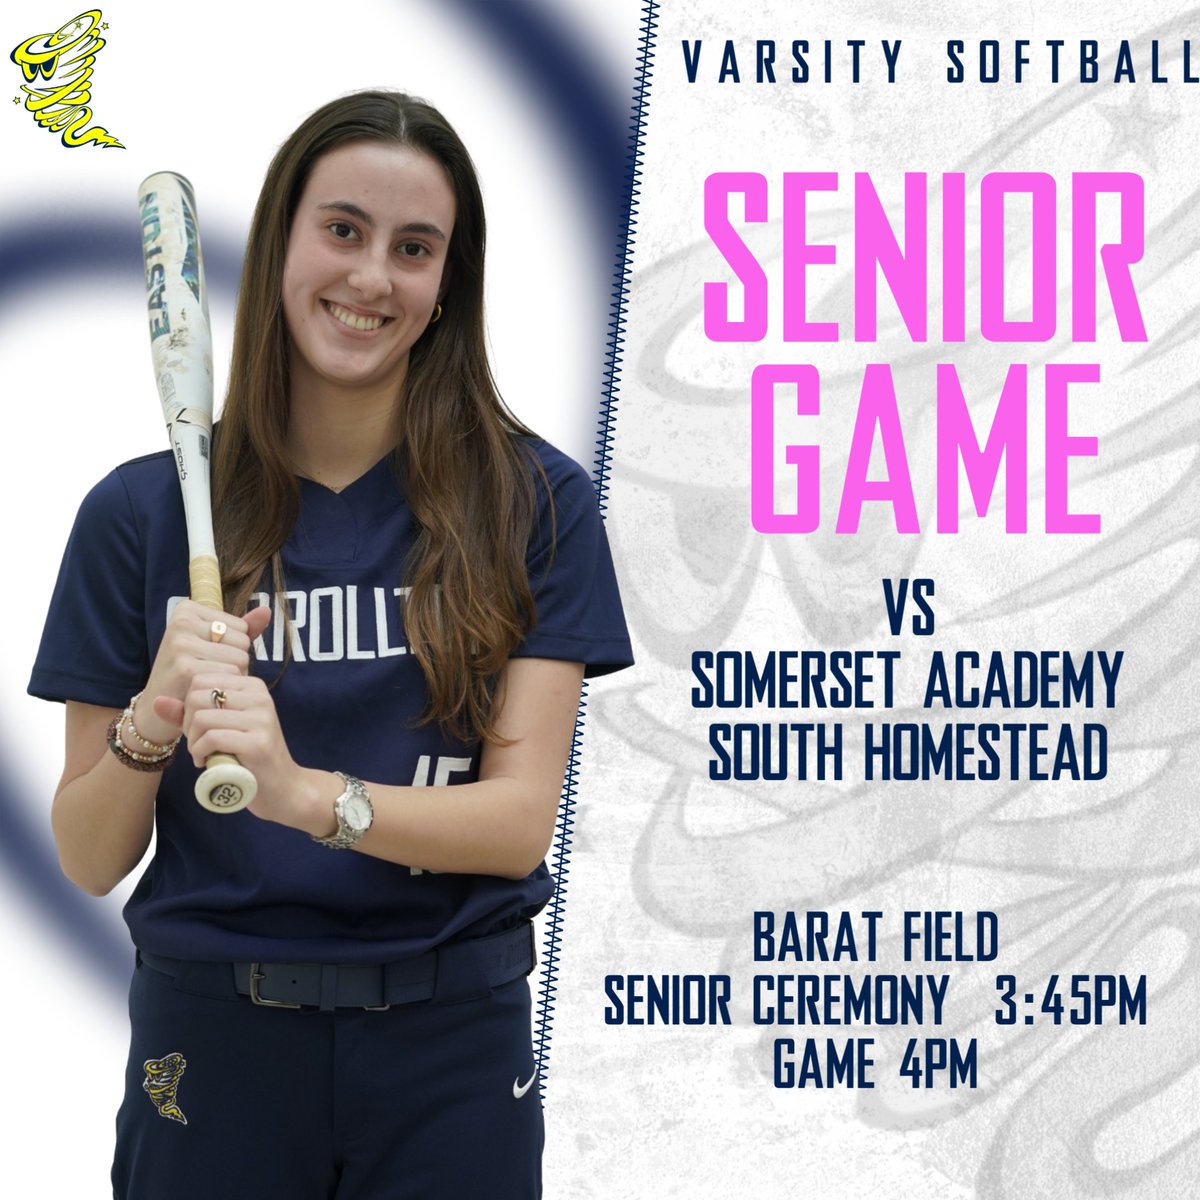 Head down to the Barat Field this afternoon to cheer on the Cyclones at their Senior Game! #gocyclones #softball #cssh #carrollton #WeAreSacredHeart